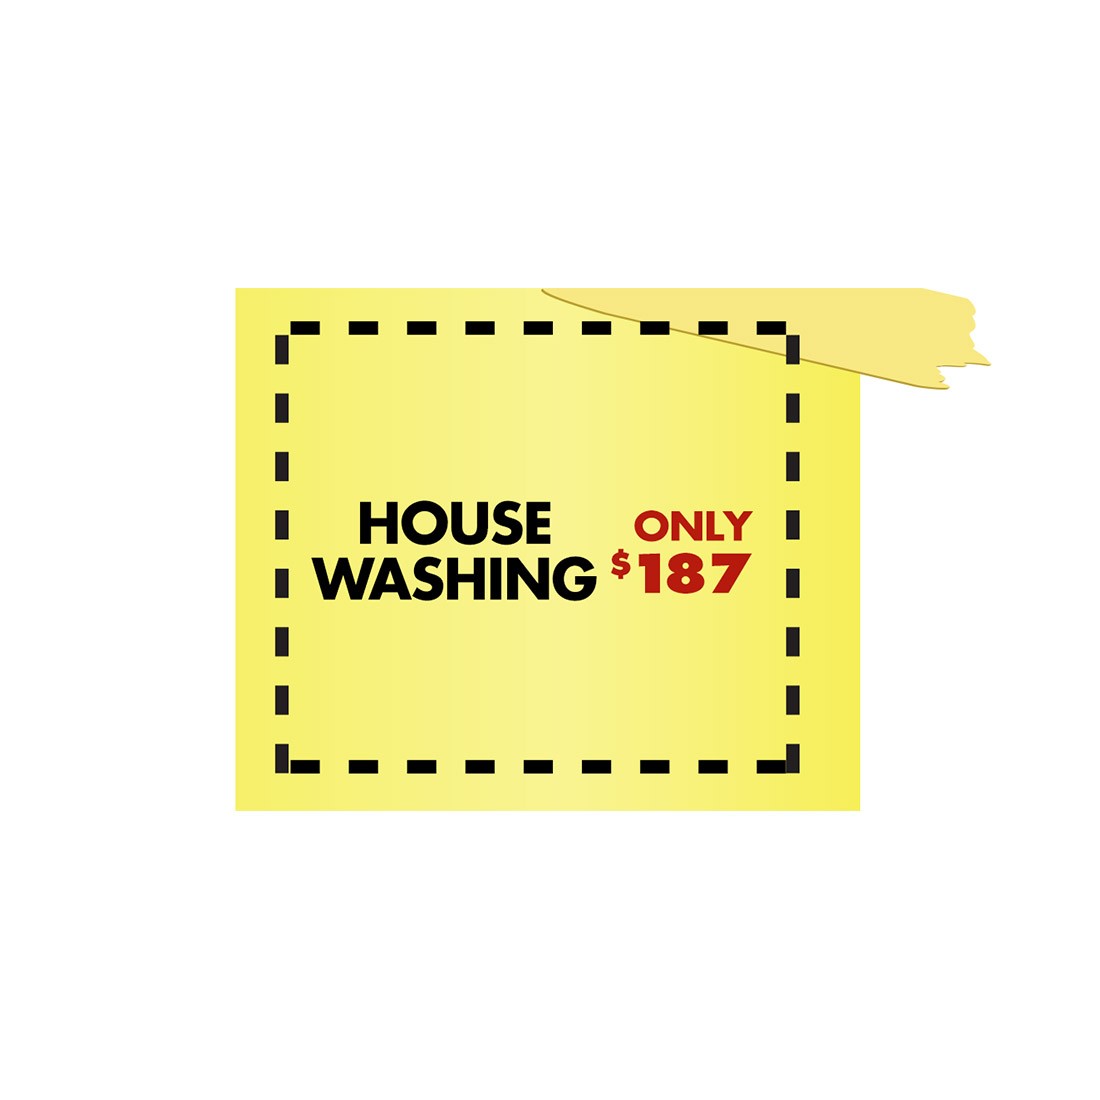 Post-It Design Suite - House Washing - Facebook Ad View